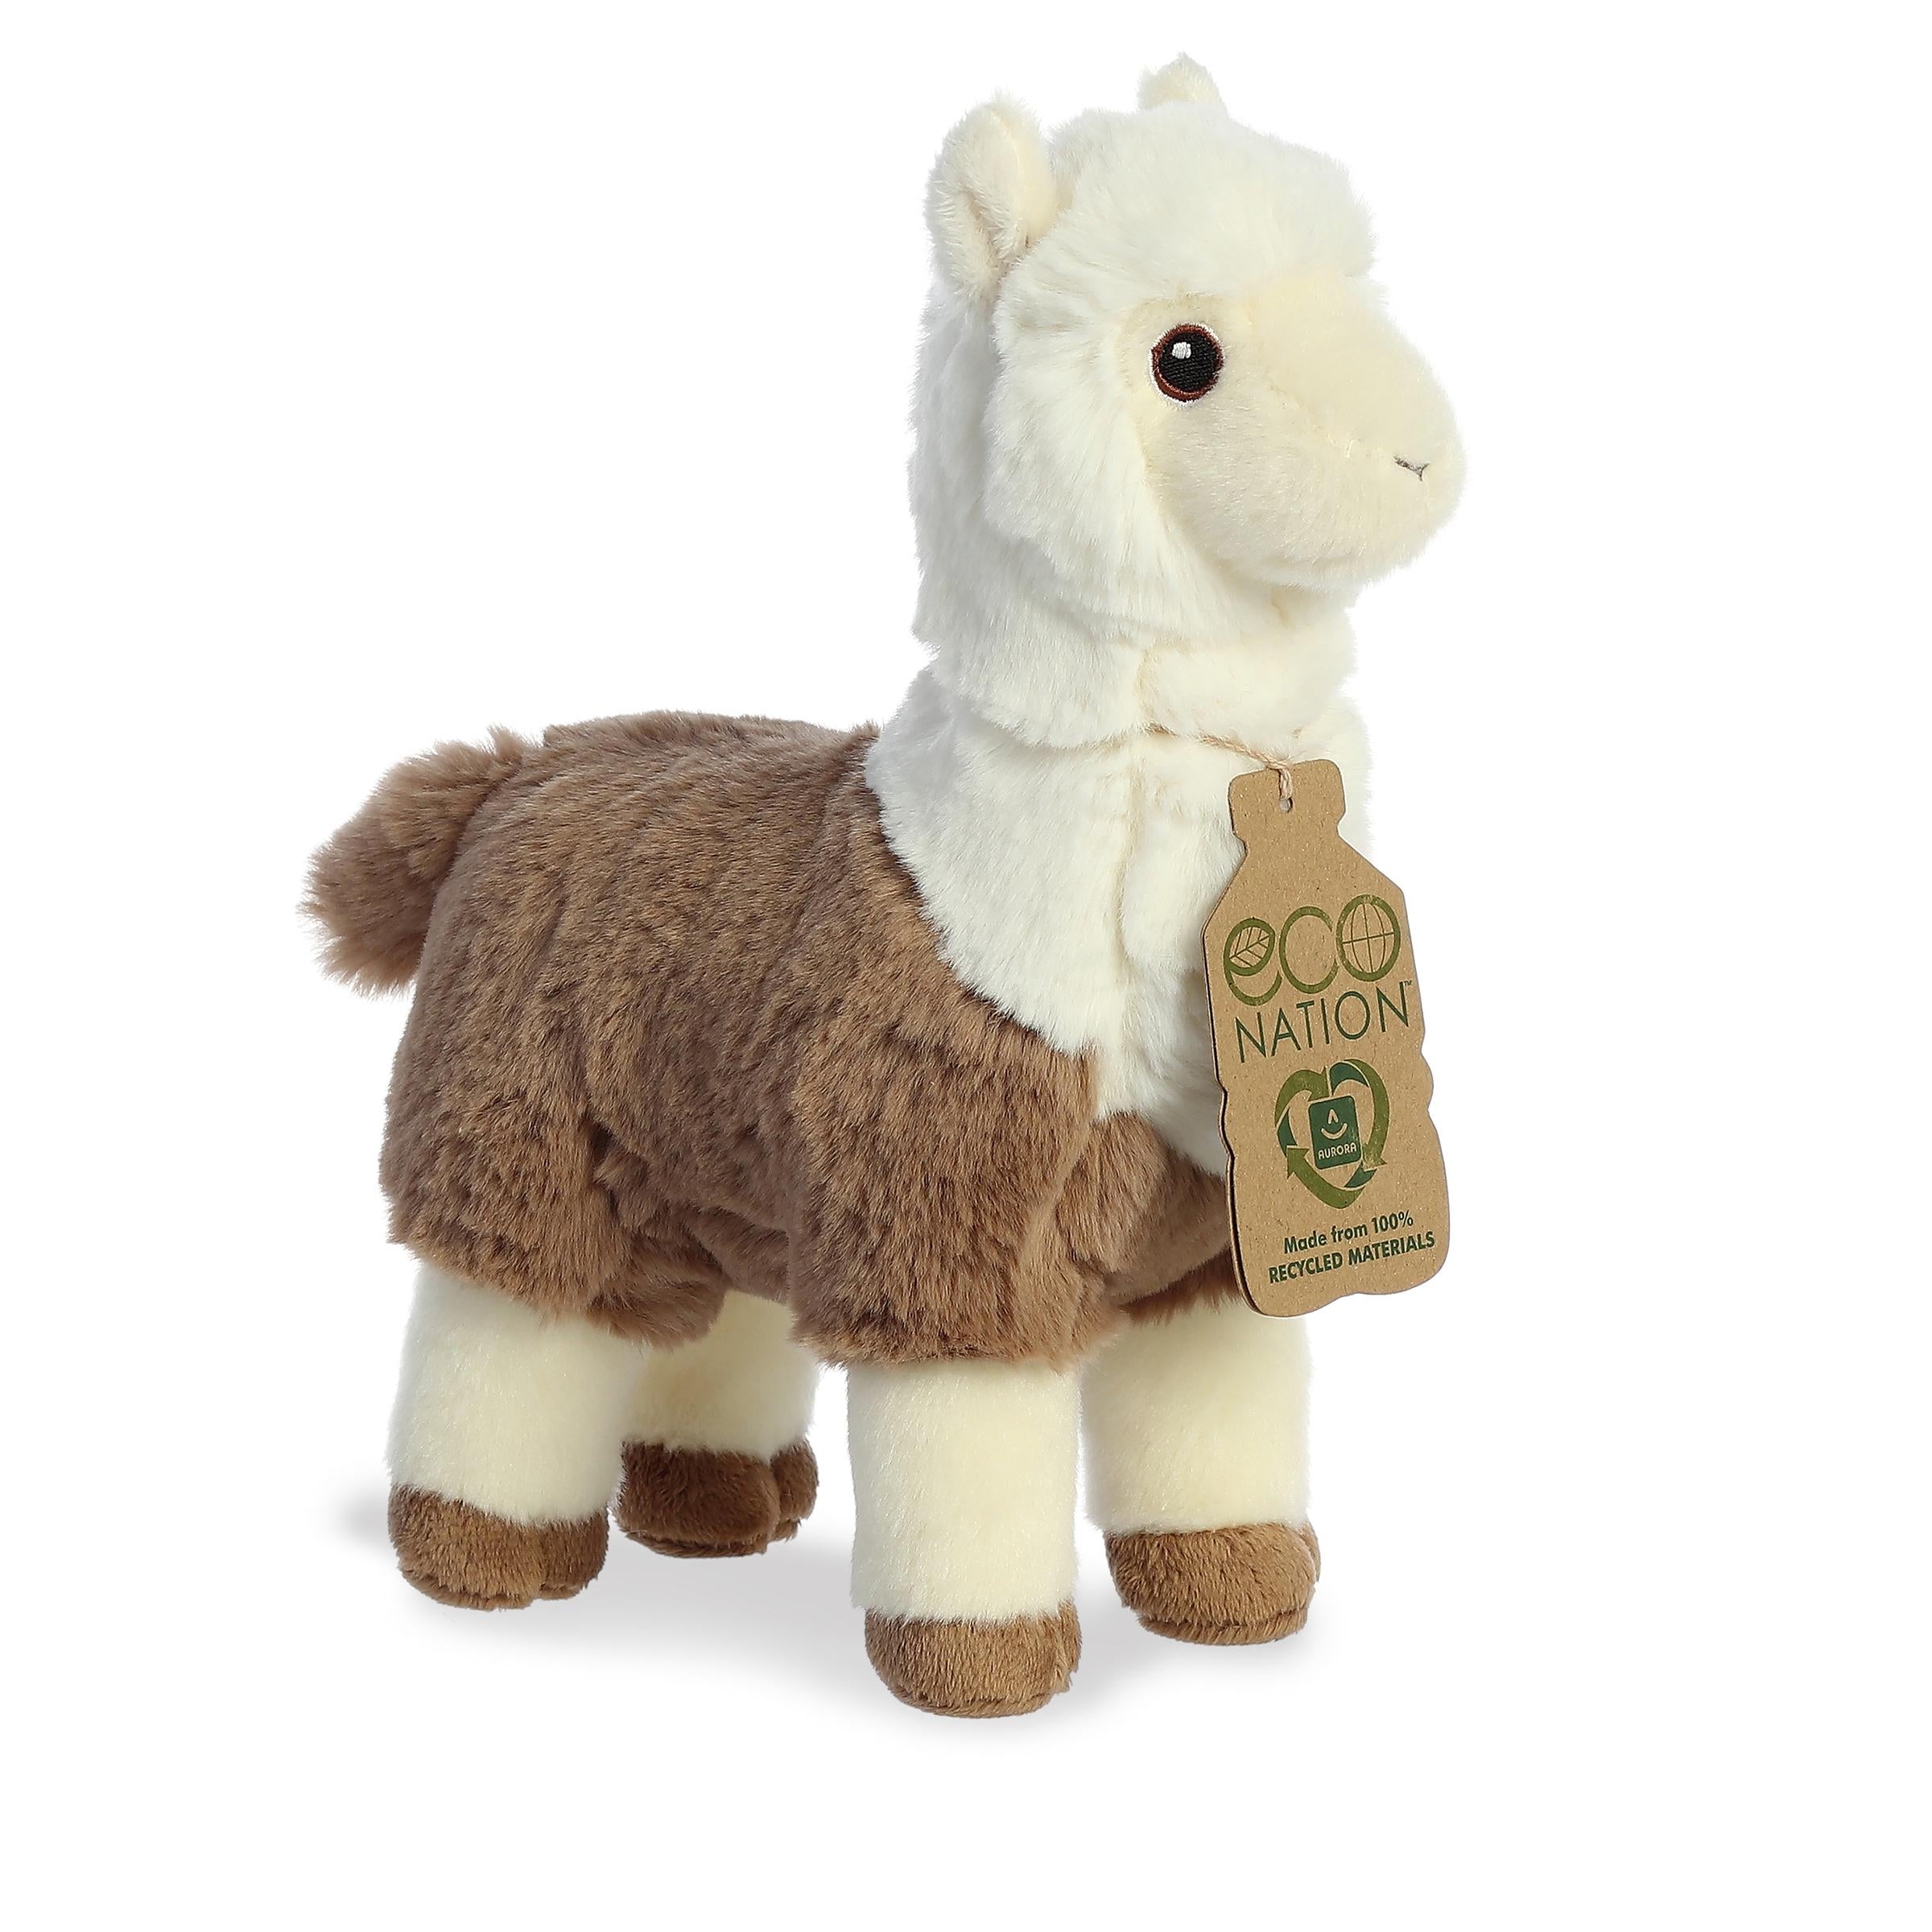 A whimsical alpaca plush with two tones of brown, darker and lighter, embroidered eyes, and an eco-nation tag